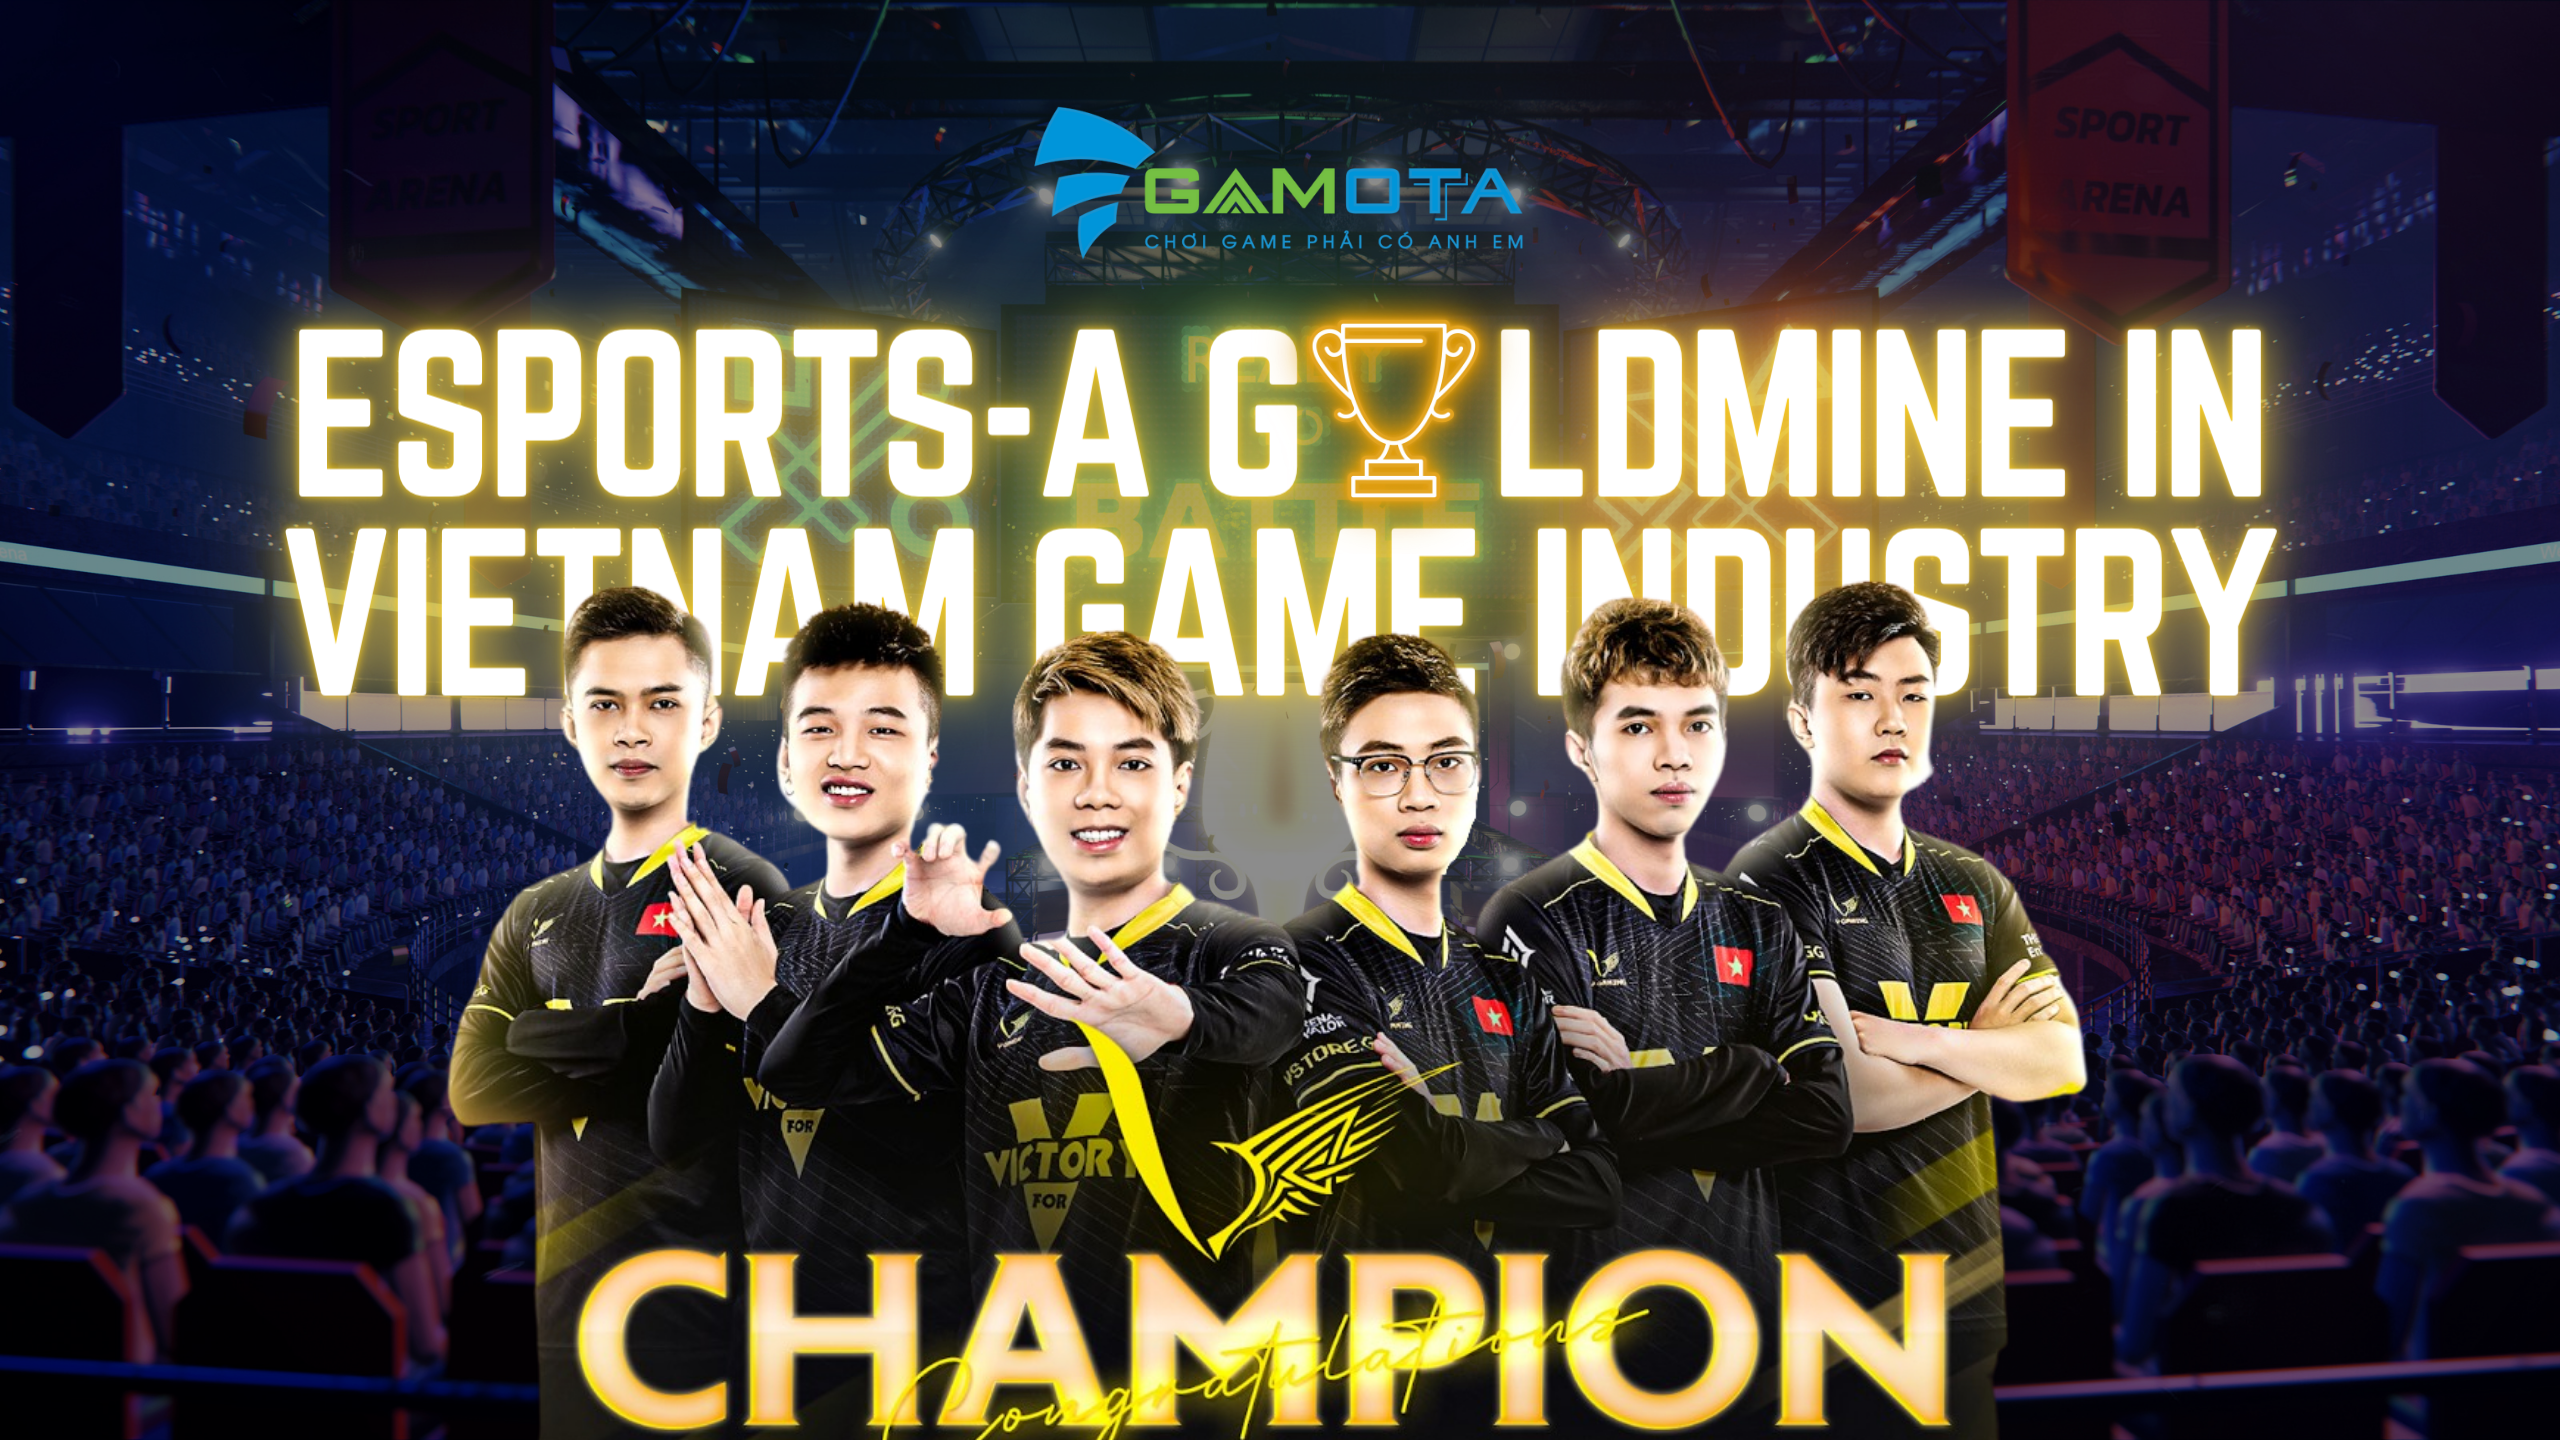 Esports - a goldmine in Vietnam game industry